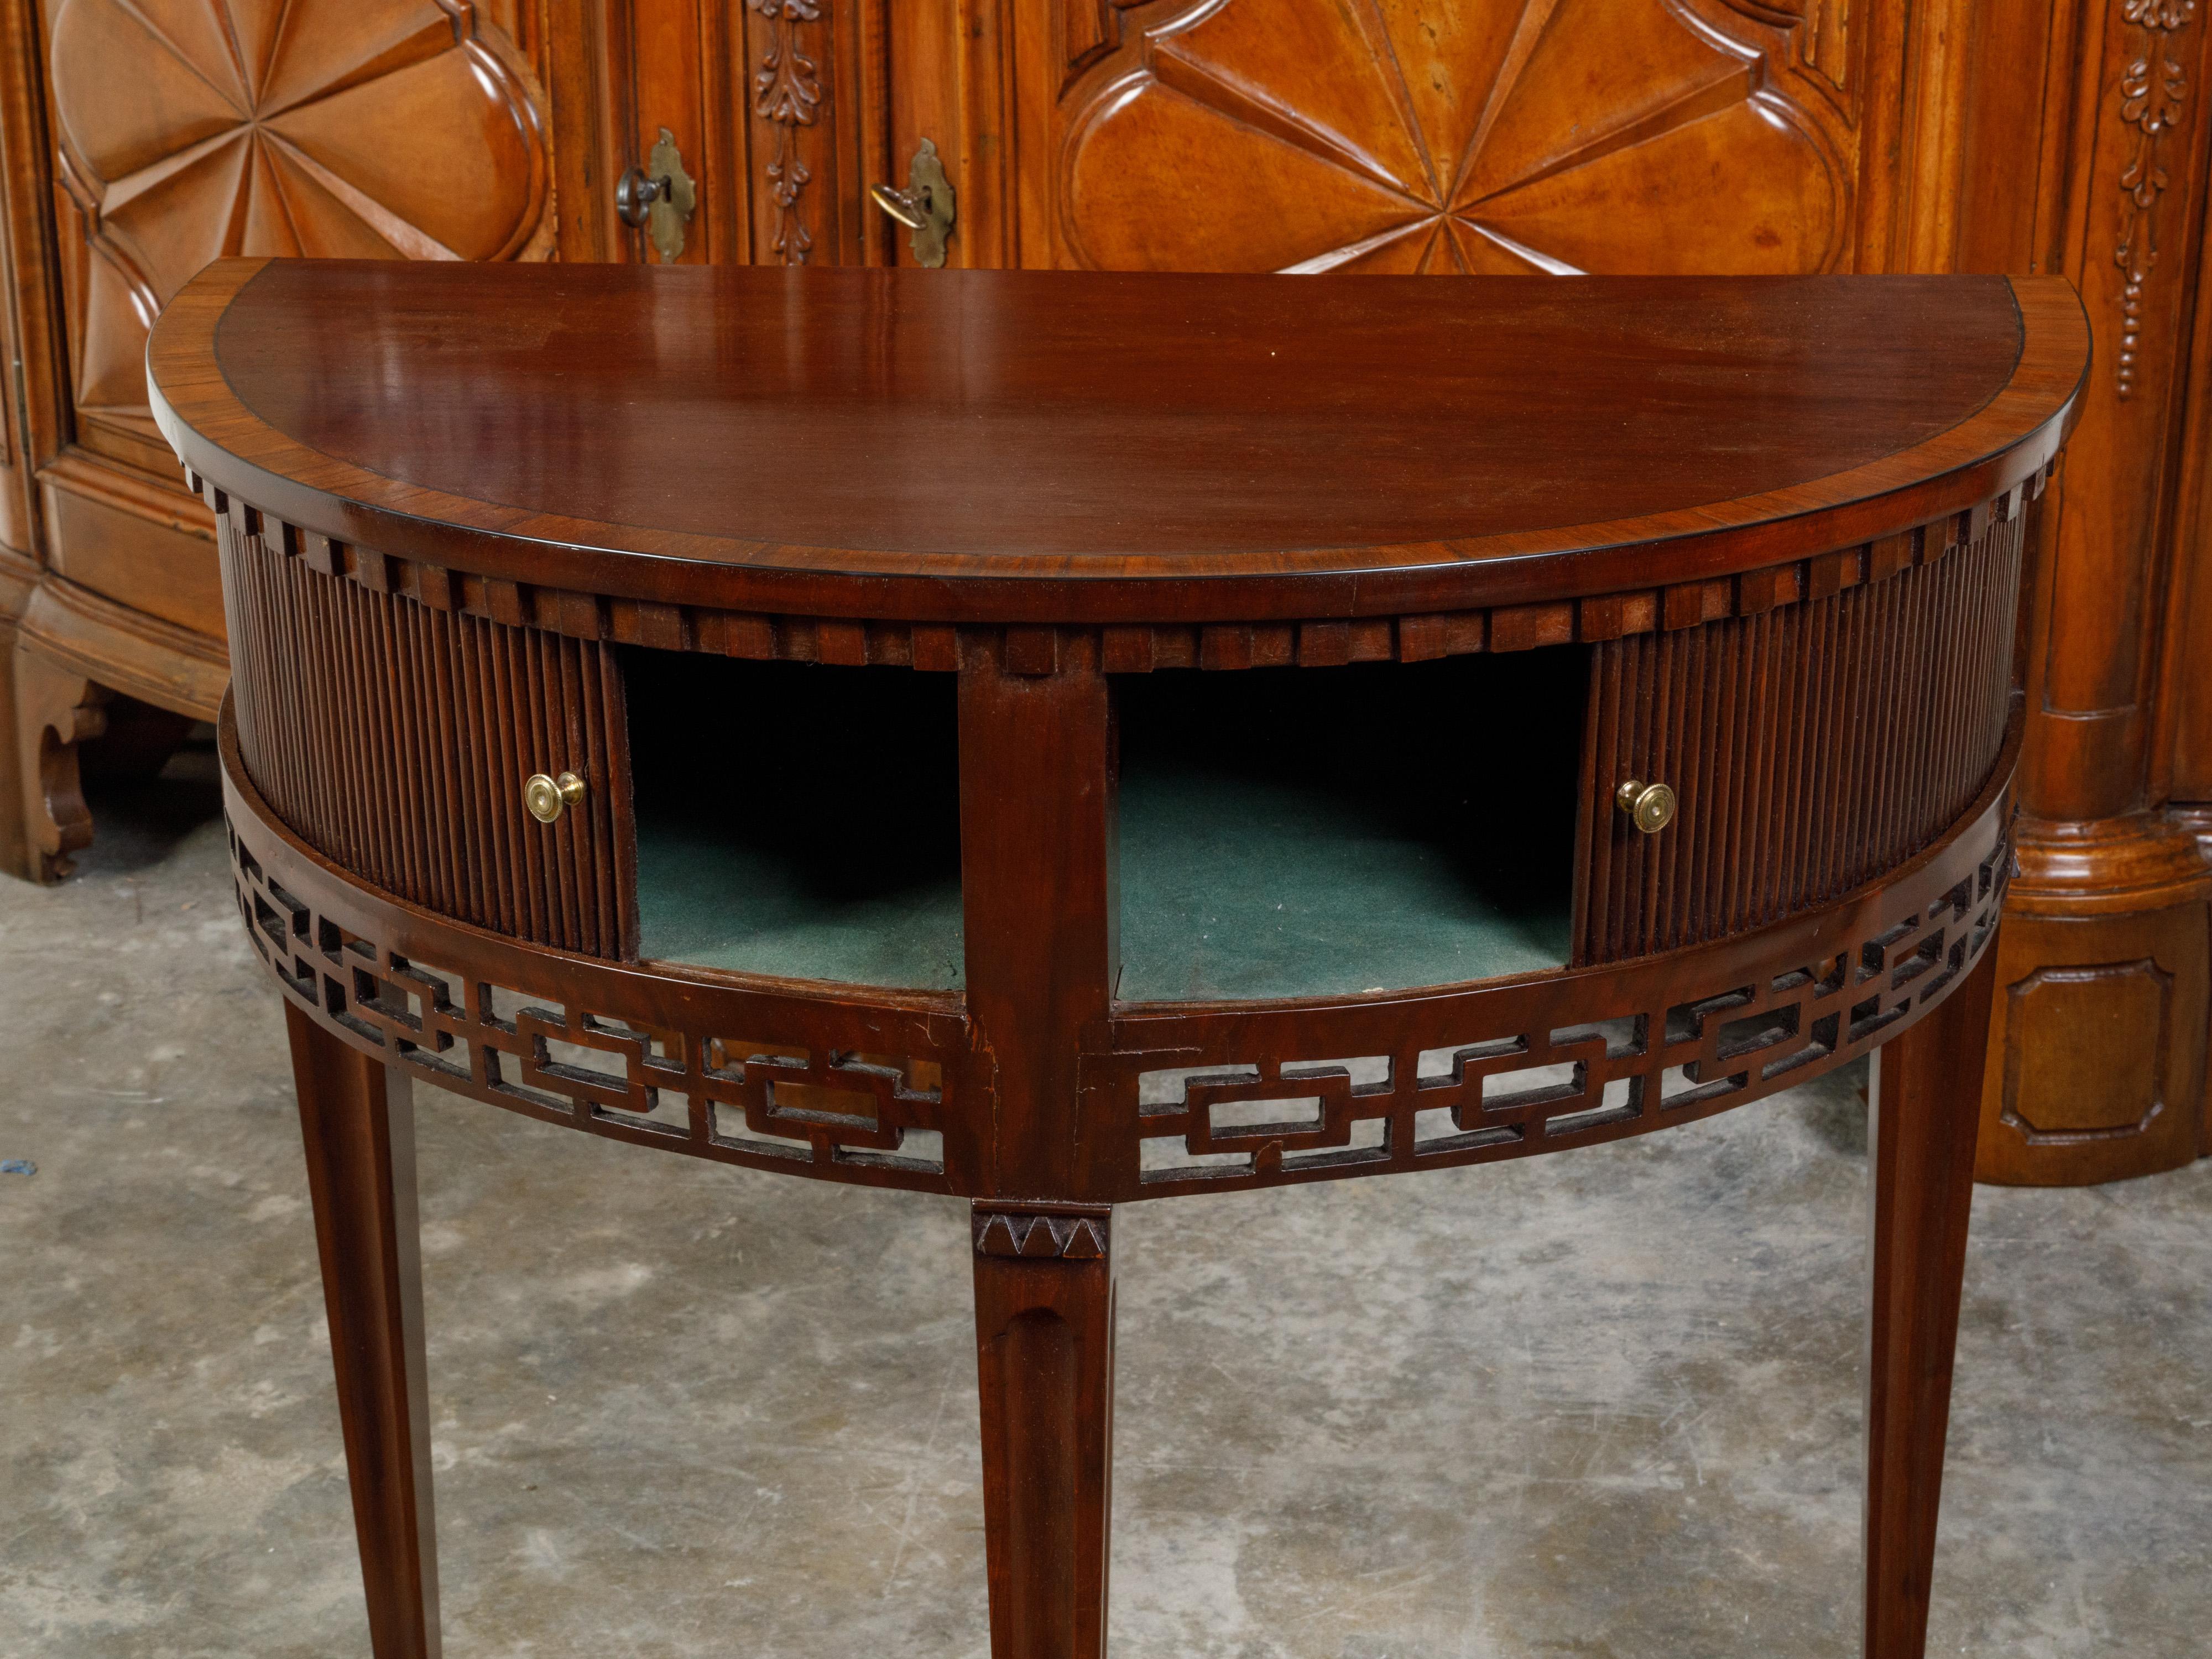 English Mahogany 19th Century Demi-Lune Console Table with Tambour Sliding Doors For Sale 2